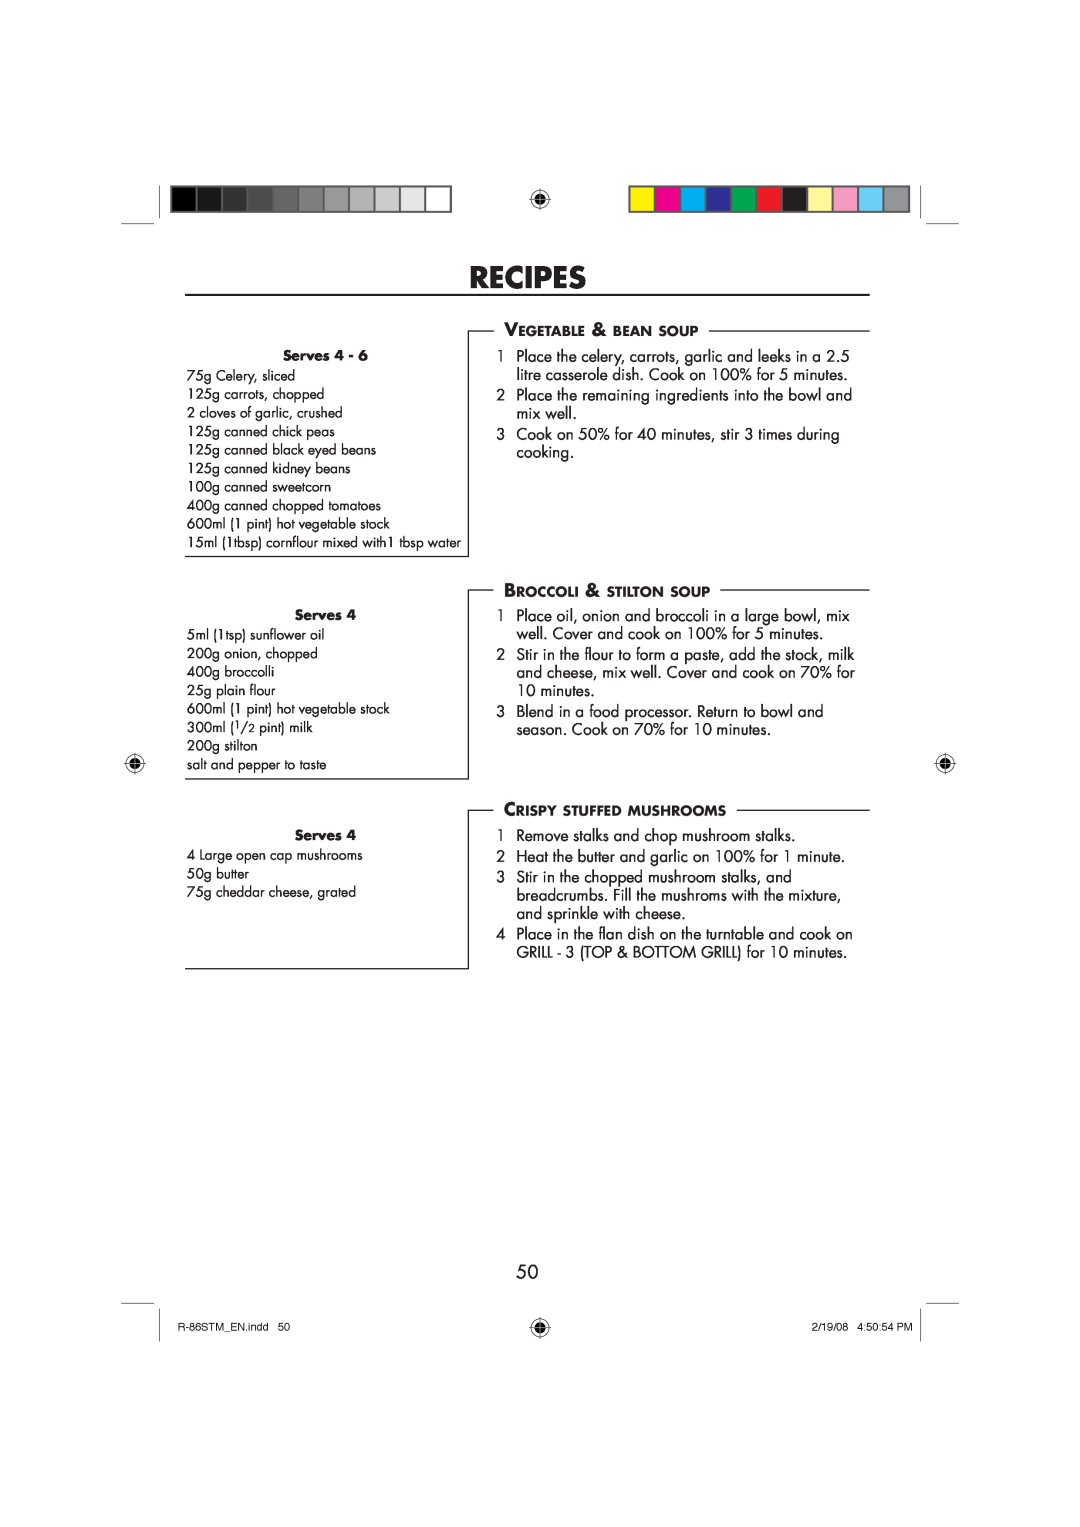 Sharp R-86STM manual Recipes, Place the remaining ingredients into the bowl and mix well 